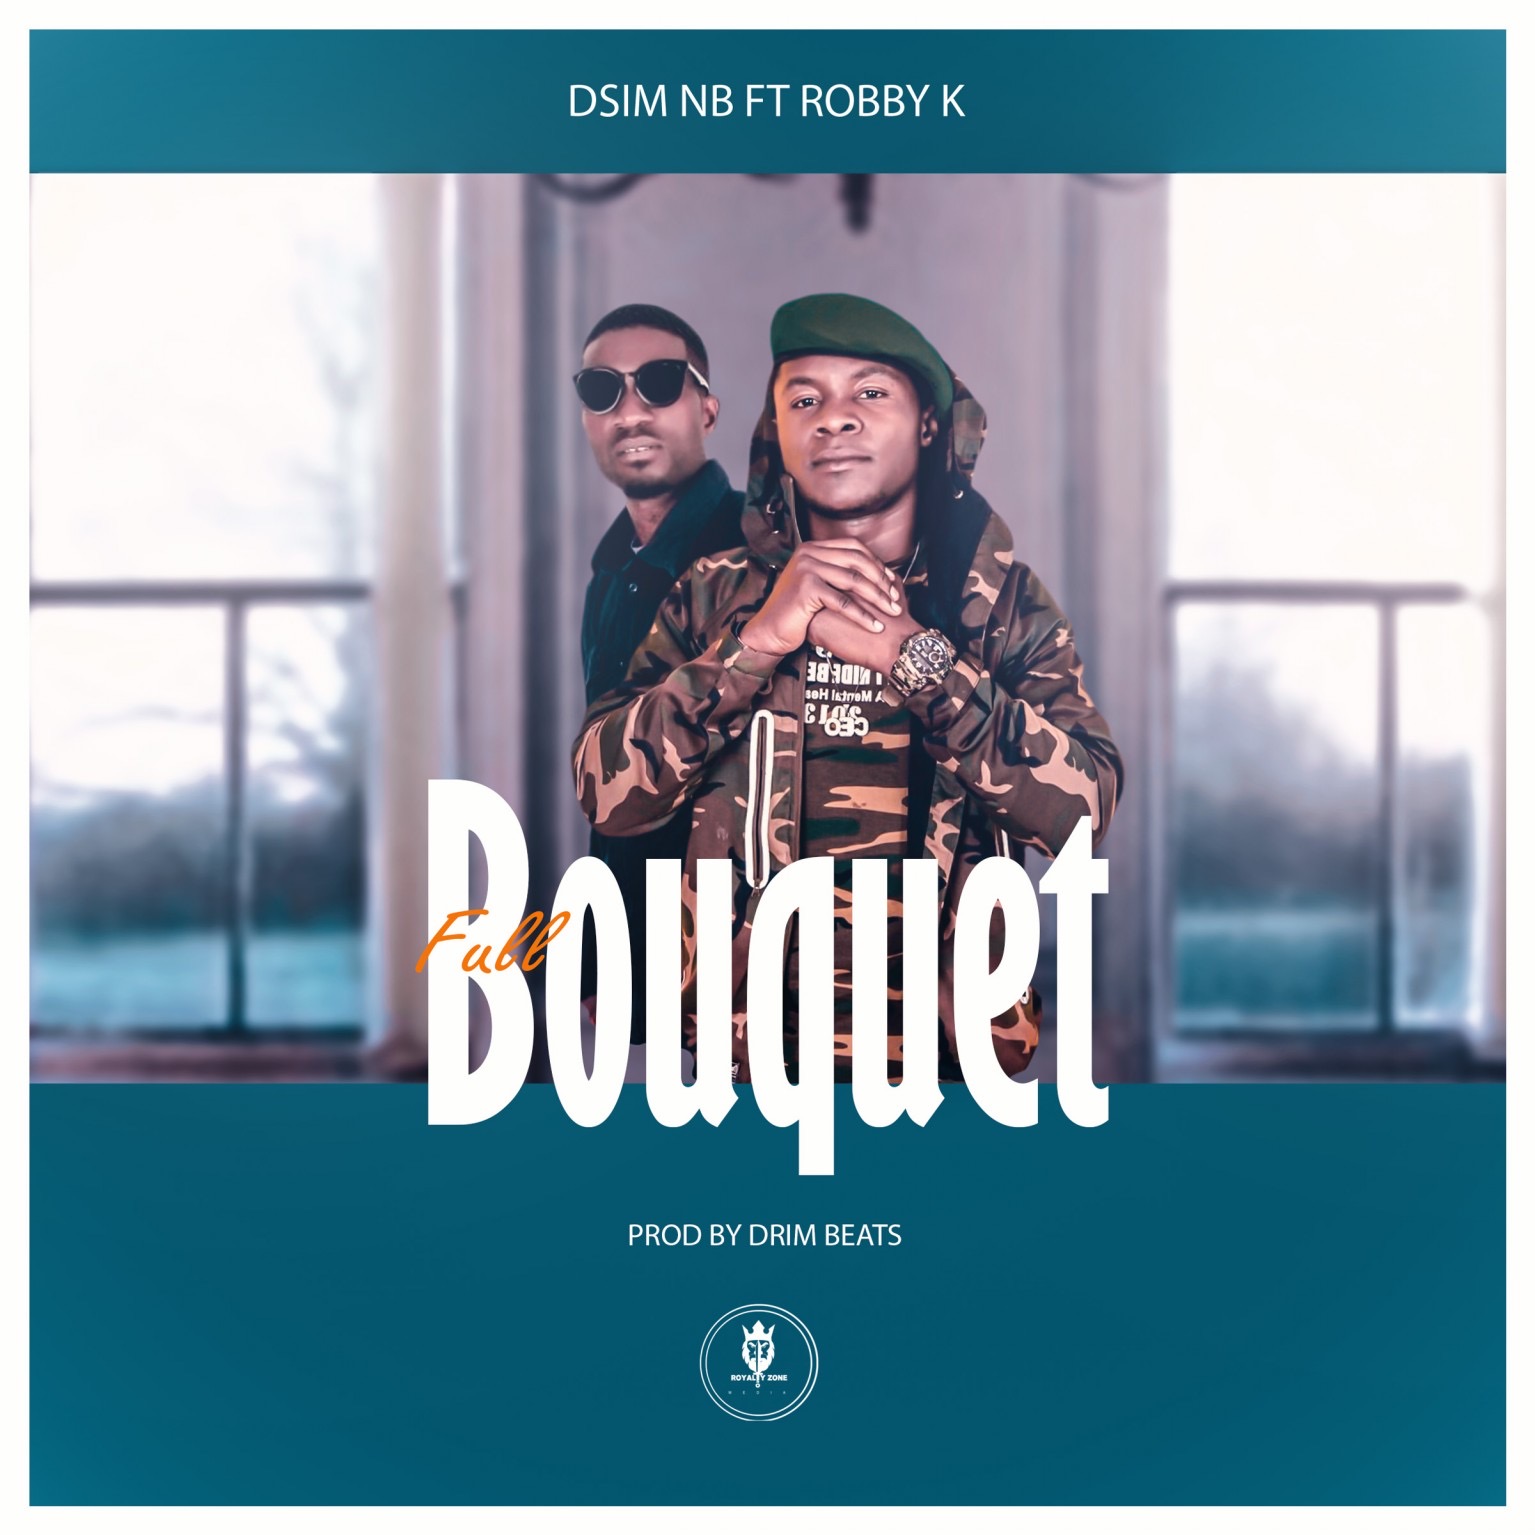 Dism NB Ft. Robby K - Full bouquet (Prod. By Drim Beats) [Audio]